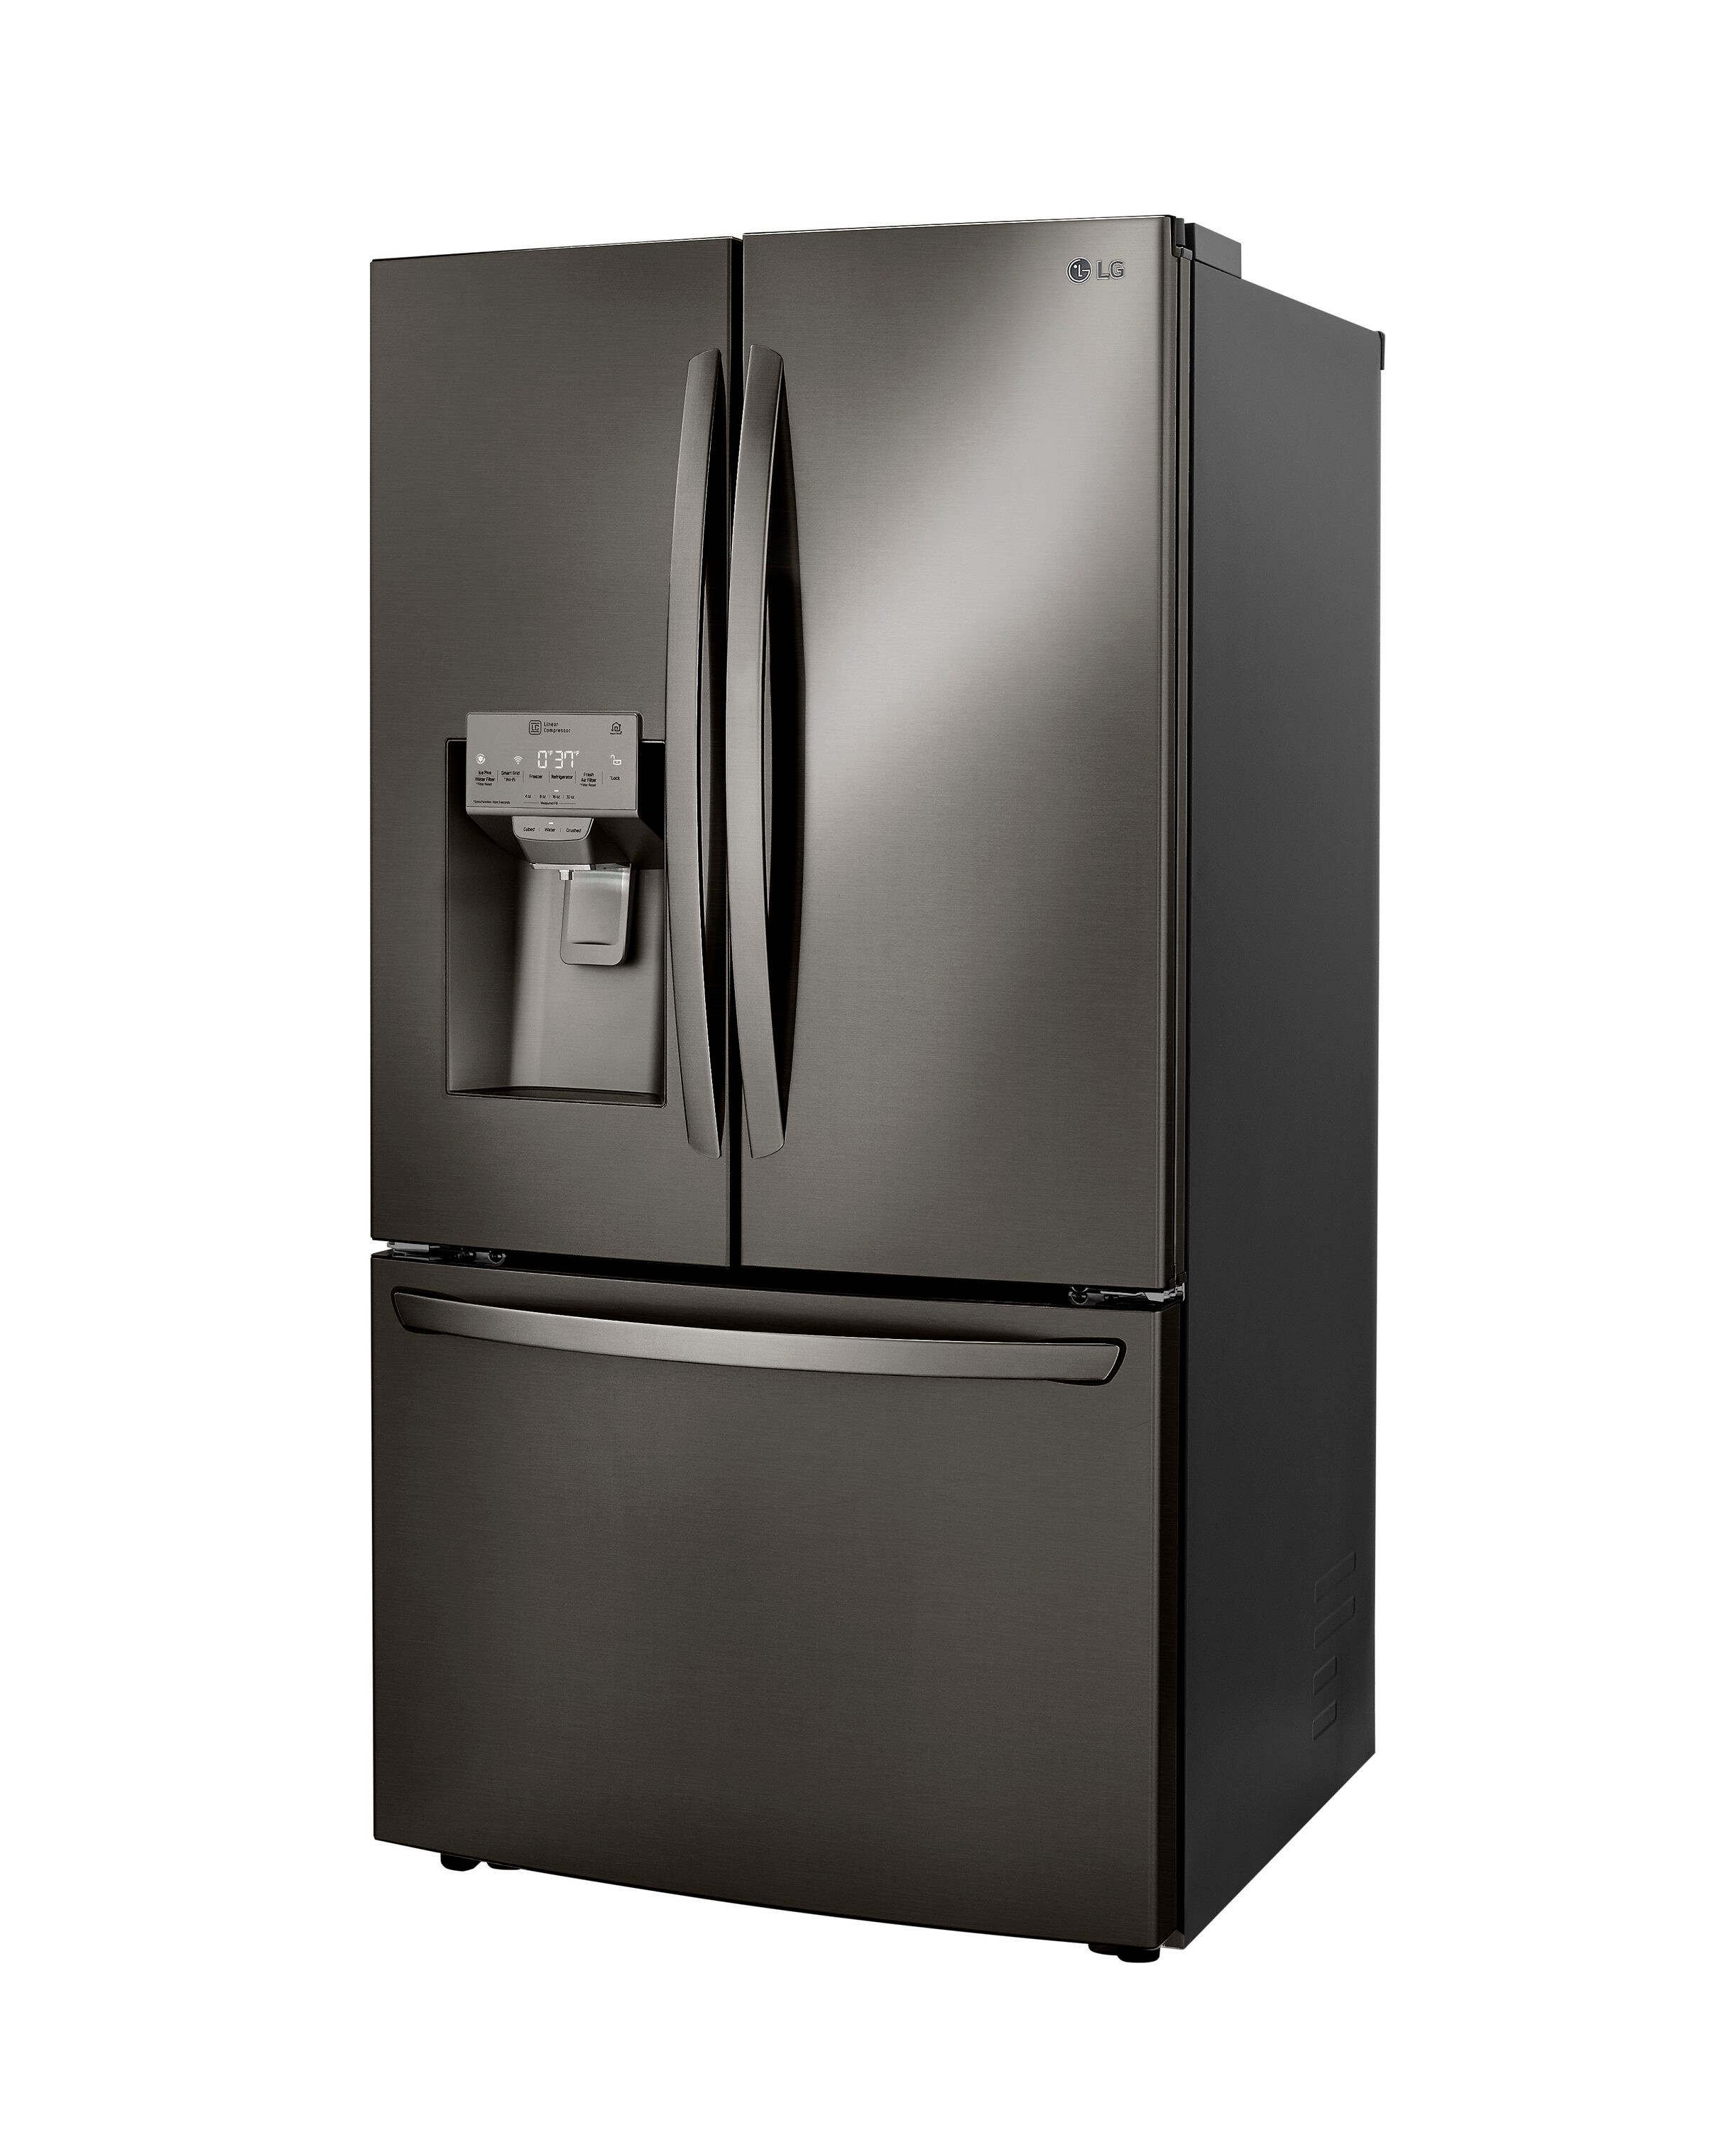 LG .5 cu ft Counter depth Smart French Door Refrigerator with